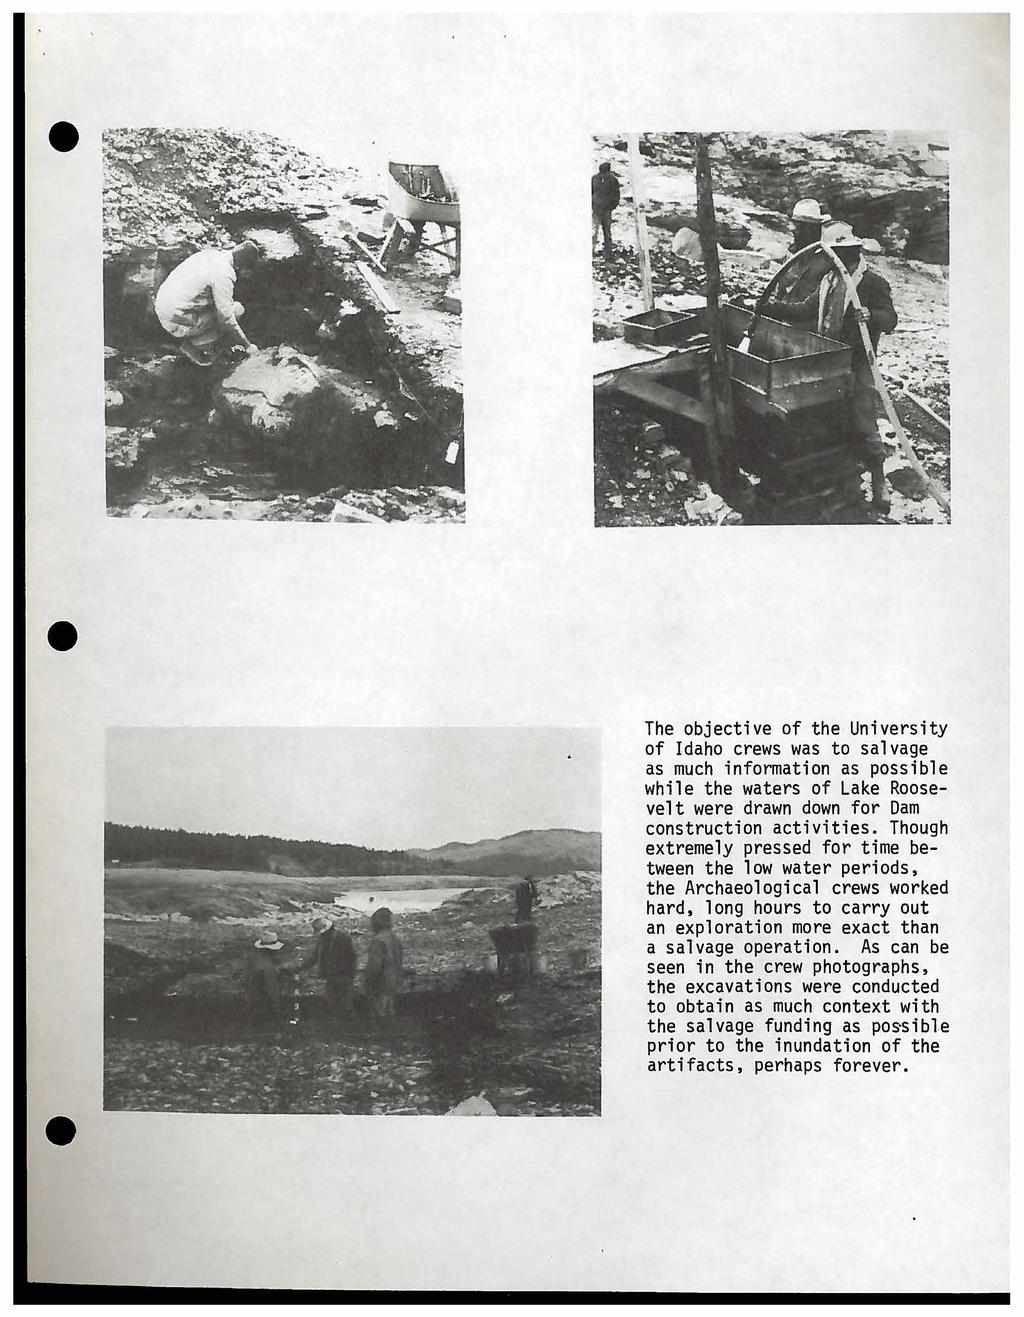 The objective of the University of Idaho crews was to salvage as much information as possible while the waters of Lake Roosevelt were drawn down for Dam construction activities.